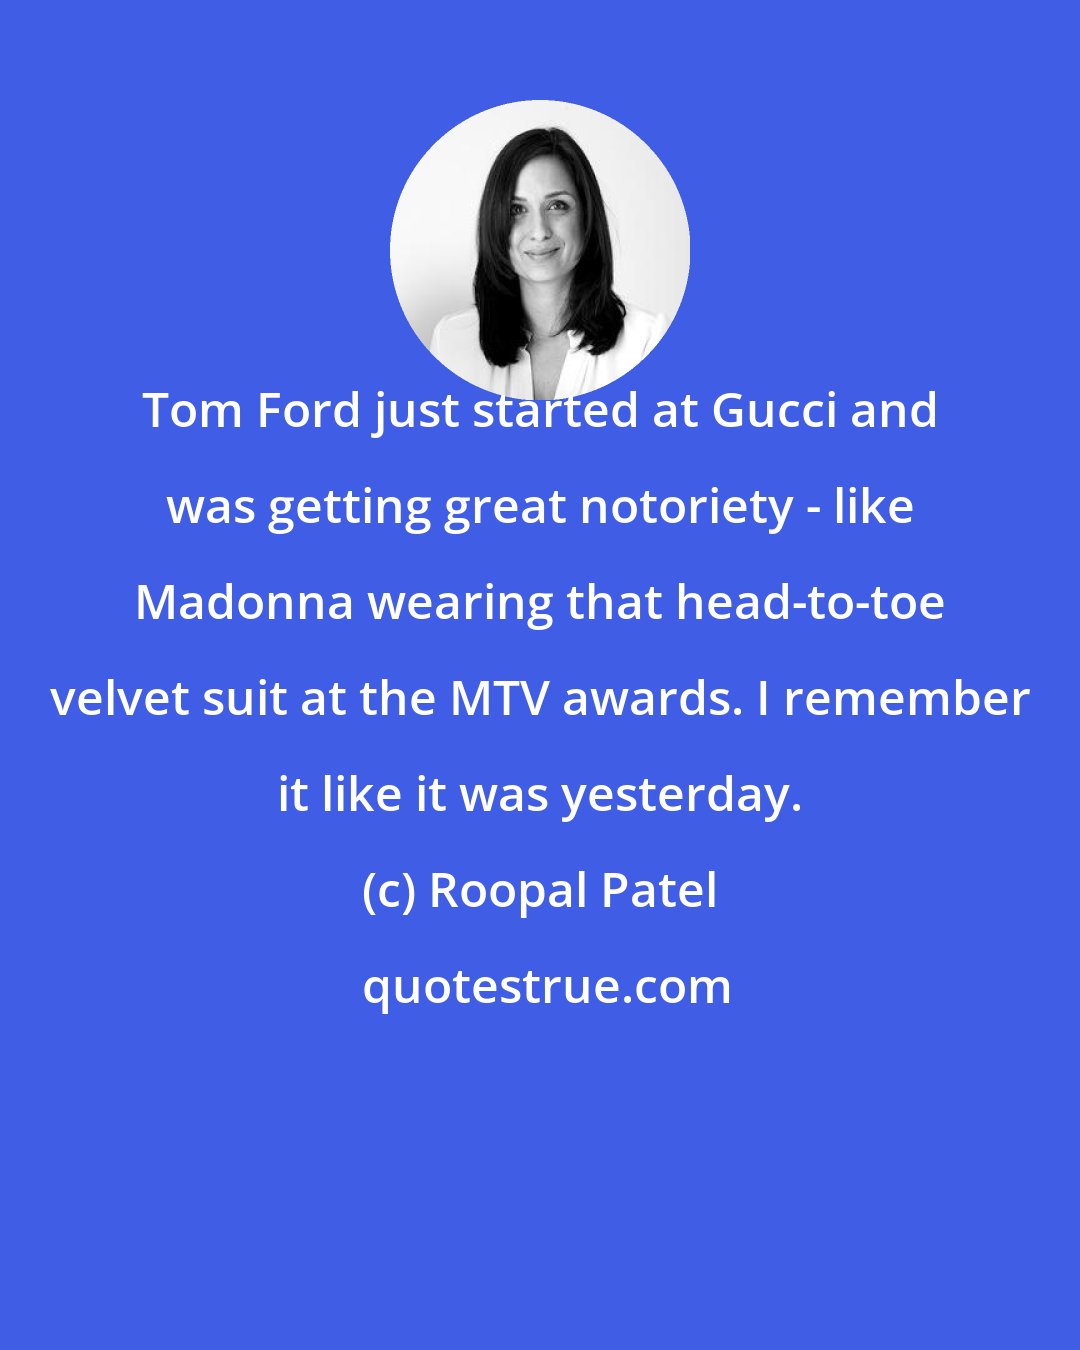 Roopal Patel: Tom Ford just started at Gucci and was getting great notoriety - like Madonna wearing that head-to-toe velvet suit at the MTV awards. I remember it like it was yesterday.